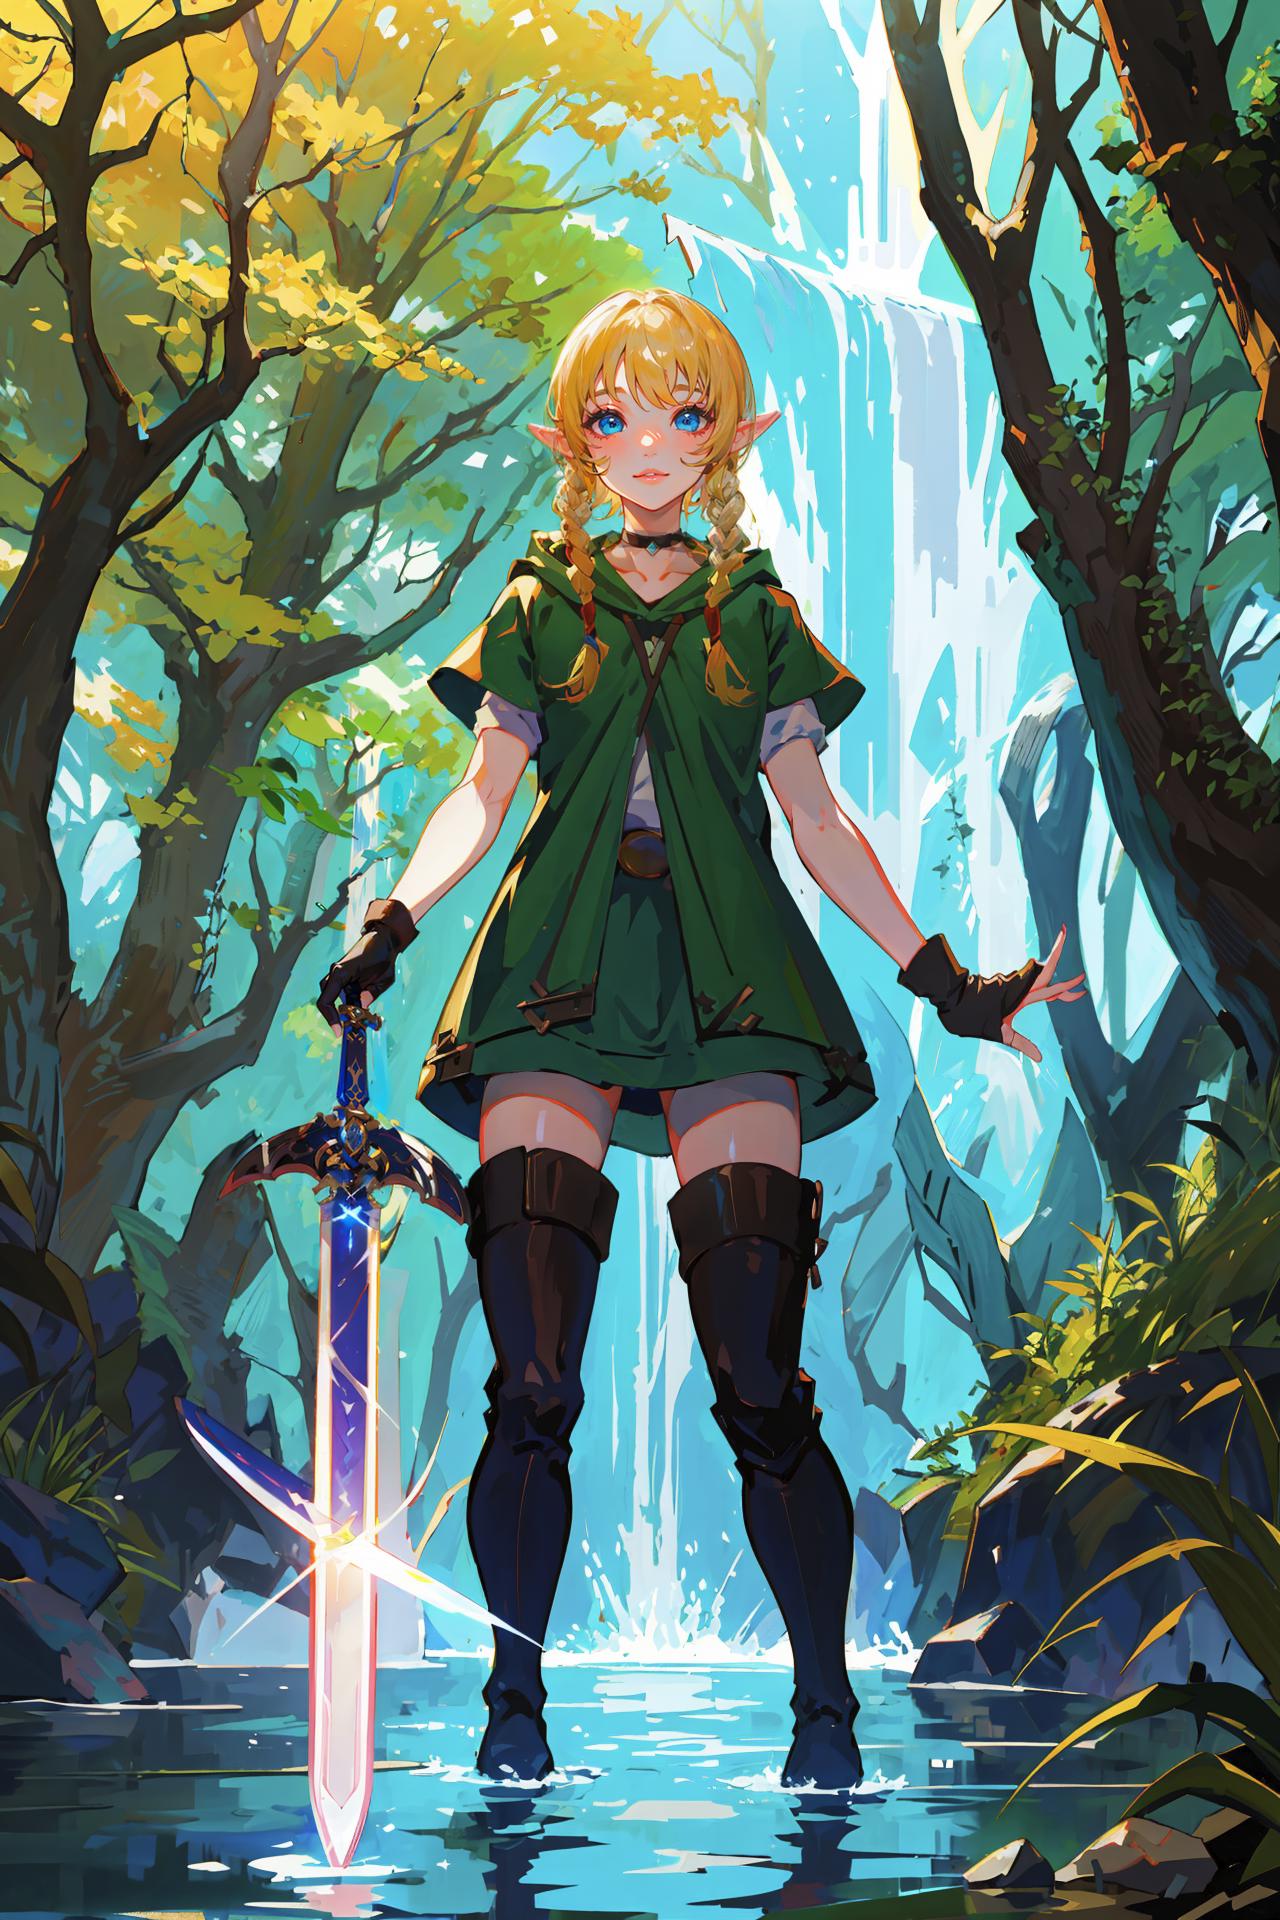 Linkle image by starlight02